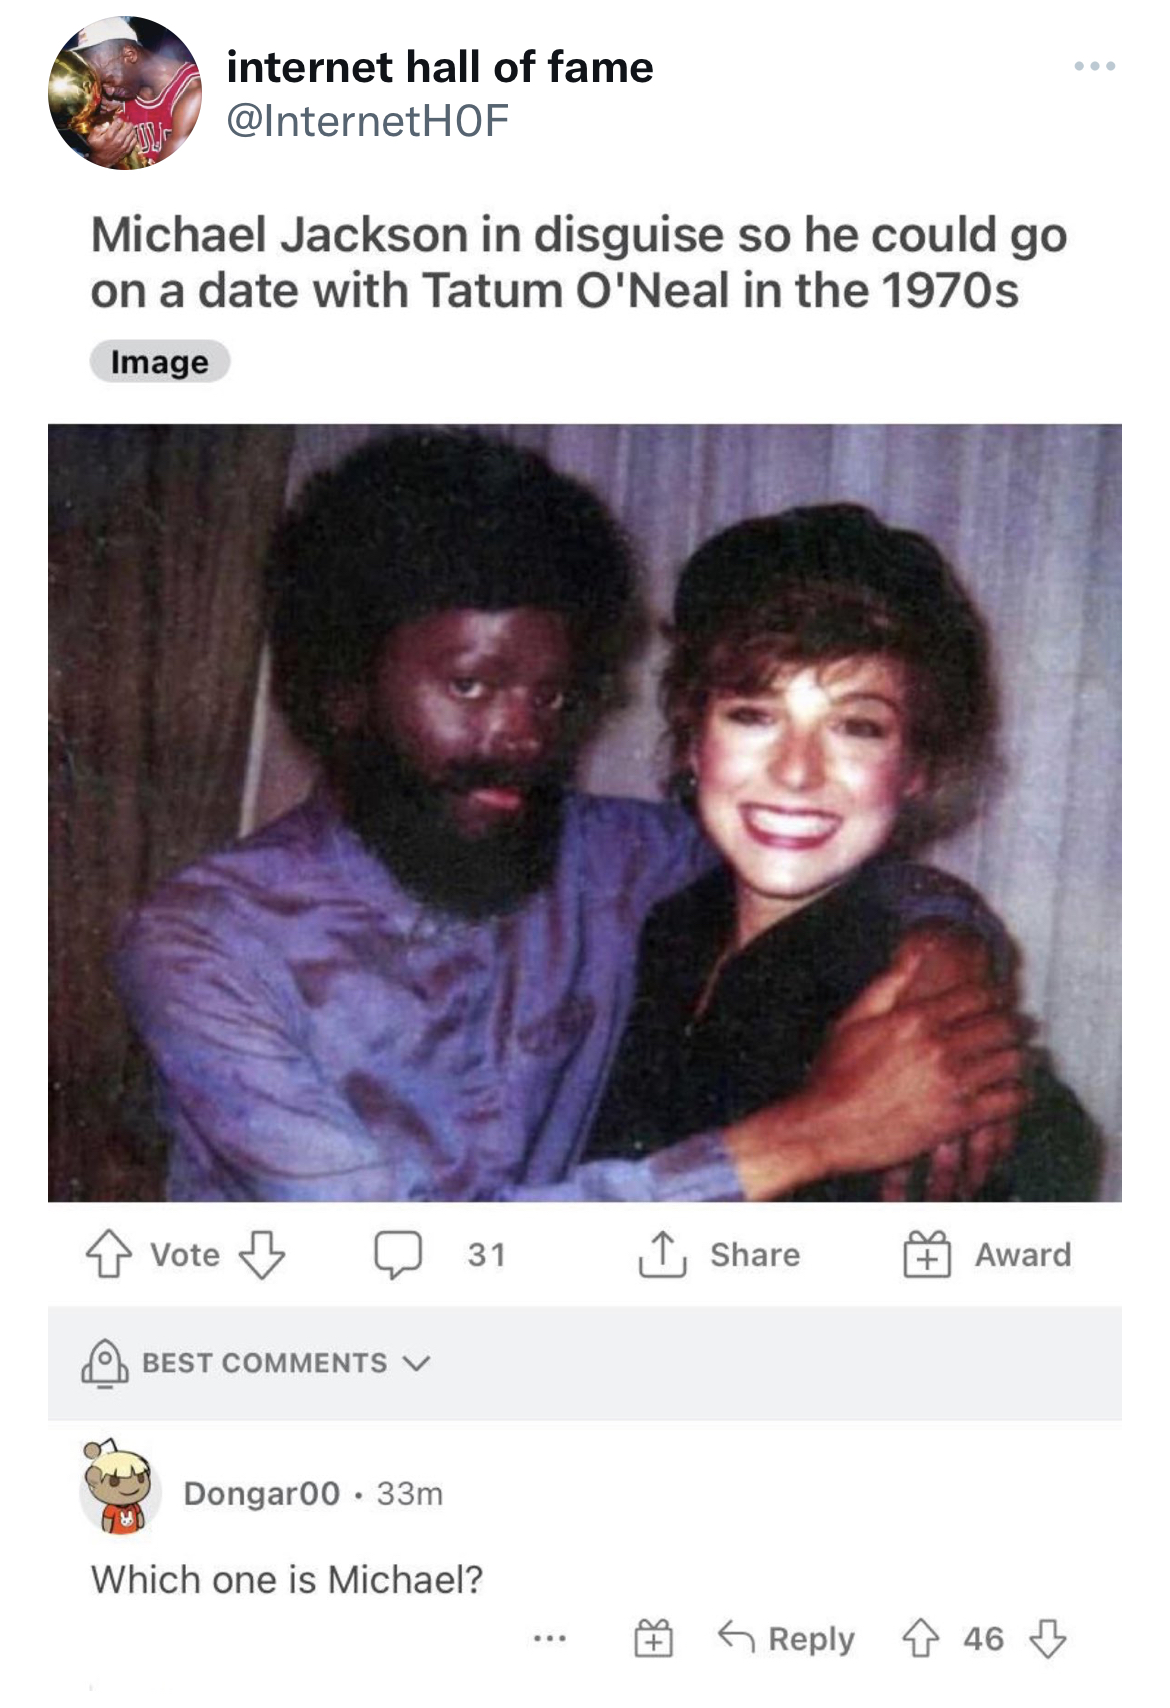 Tweets Roasting Celebs - tatum o neal michael jackson - internet hall of fame Michael Jackson in disguise so he could go on a date with Tatum O'Neal in the 1970s Image Vote Best 31 Dongar00.33m Which one is Michael? 1 Award 46